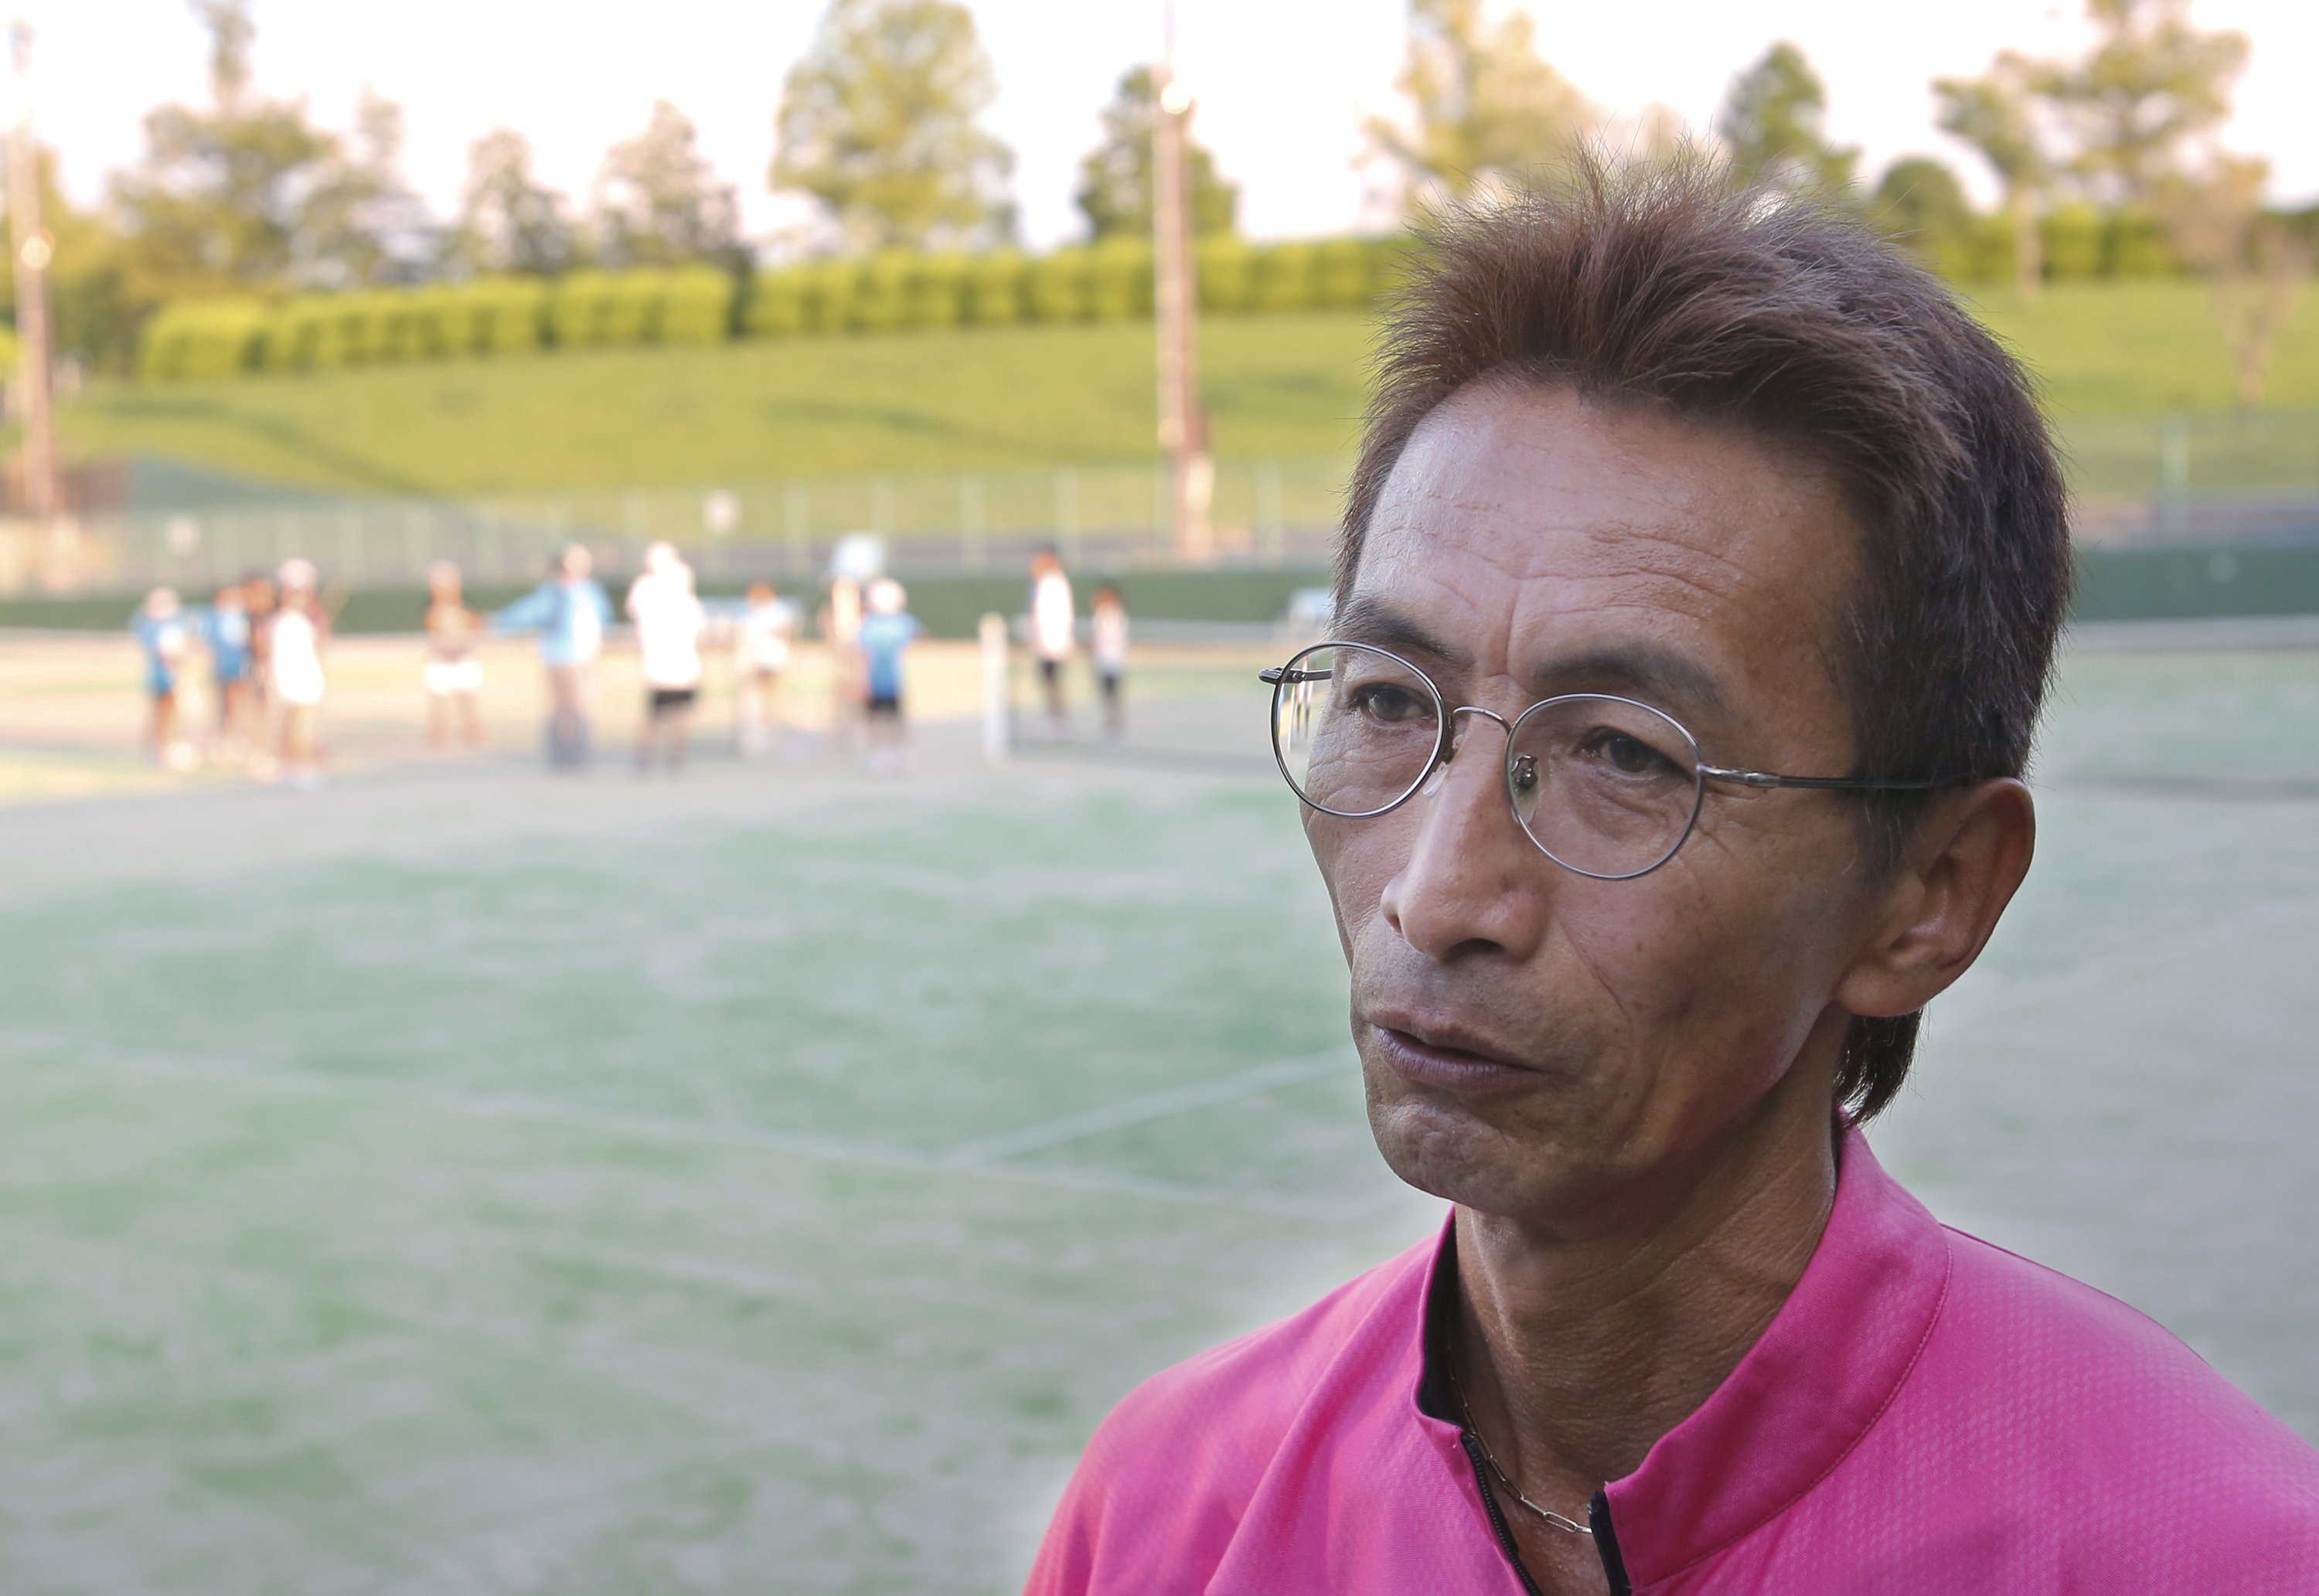 Green Tennis Garden coach Masaki Kashiwai speaks during an interview in Matsue, Japan on Sept. 8, 2014. Kashiwai began coaching Nishikori when he was just six years old and quickly saw traits in the future star that separated him from the other players.